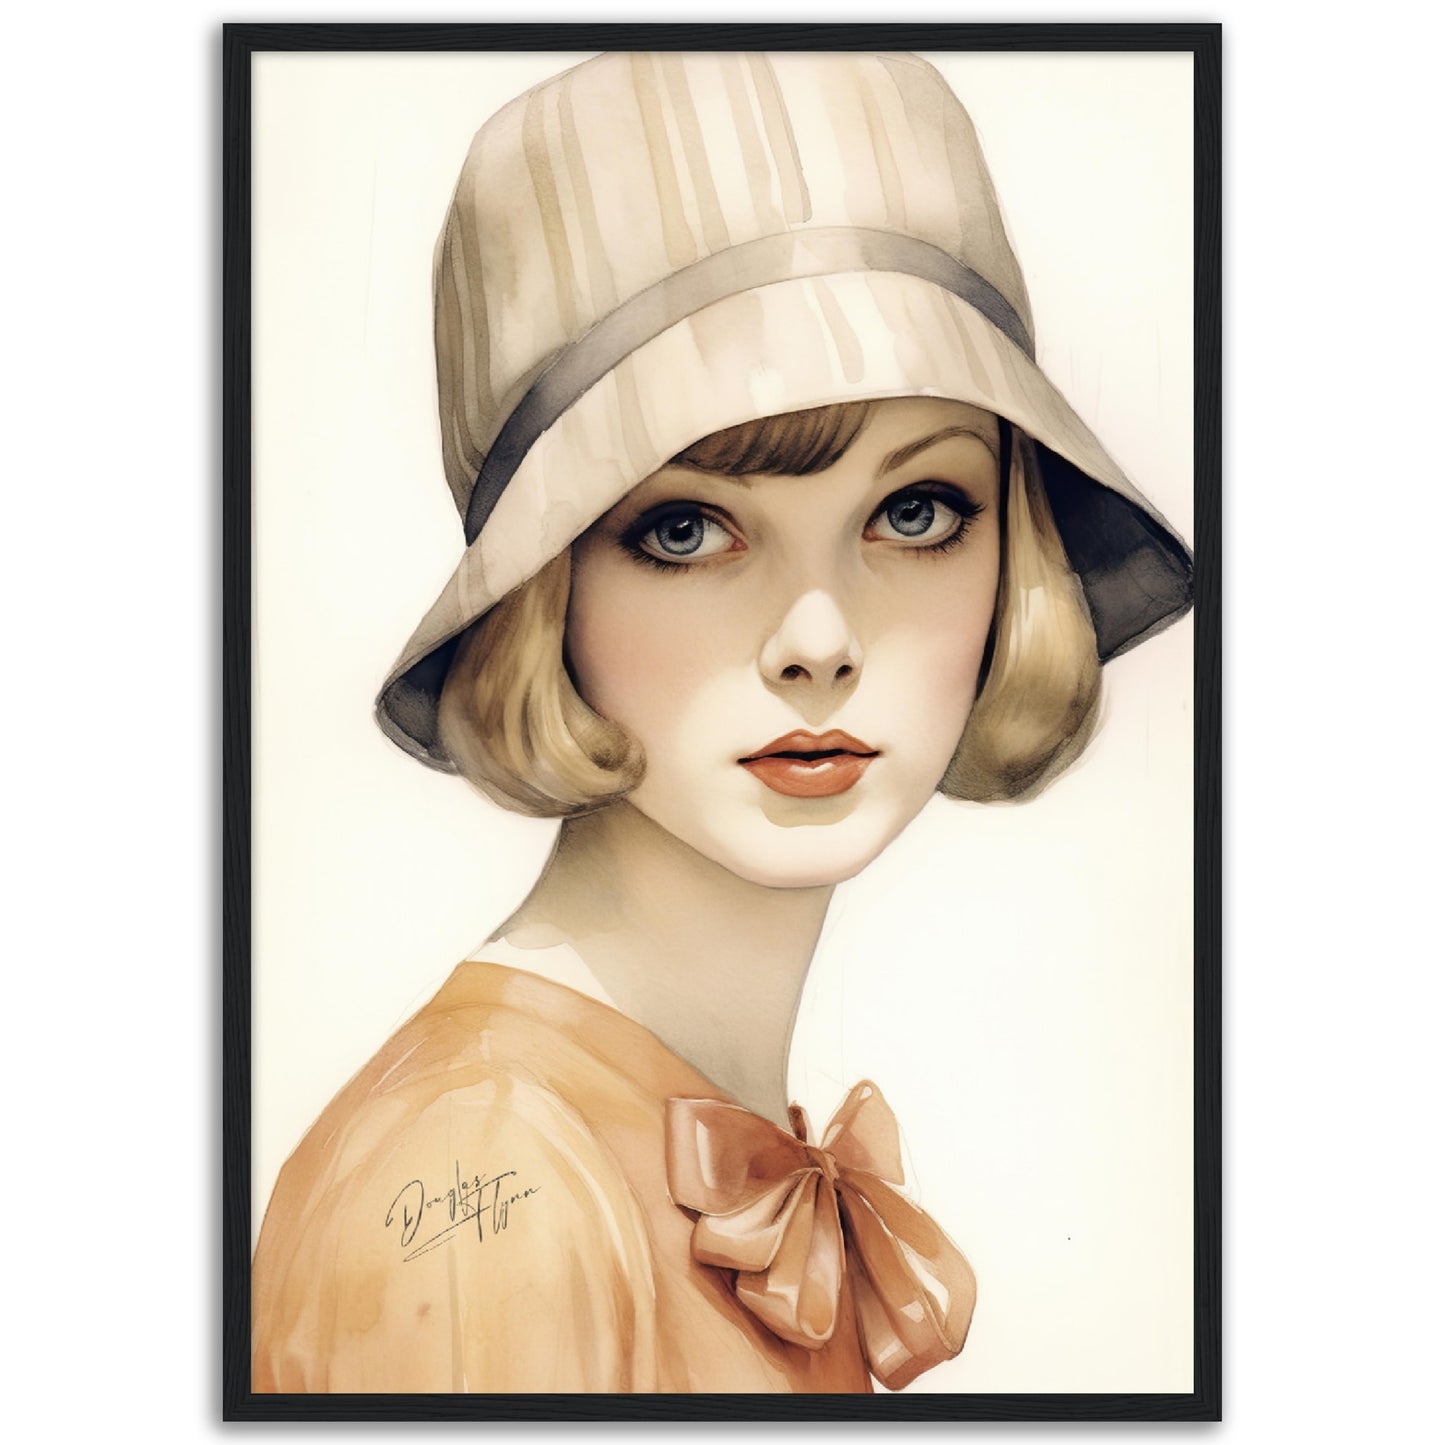 »Classic Beige Cloche Hat, 1920s with Bow Detail«